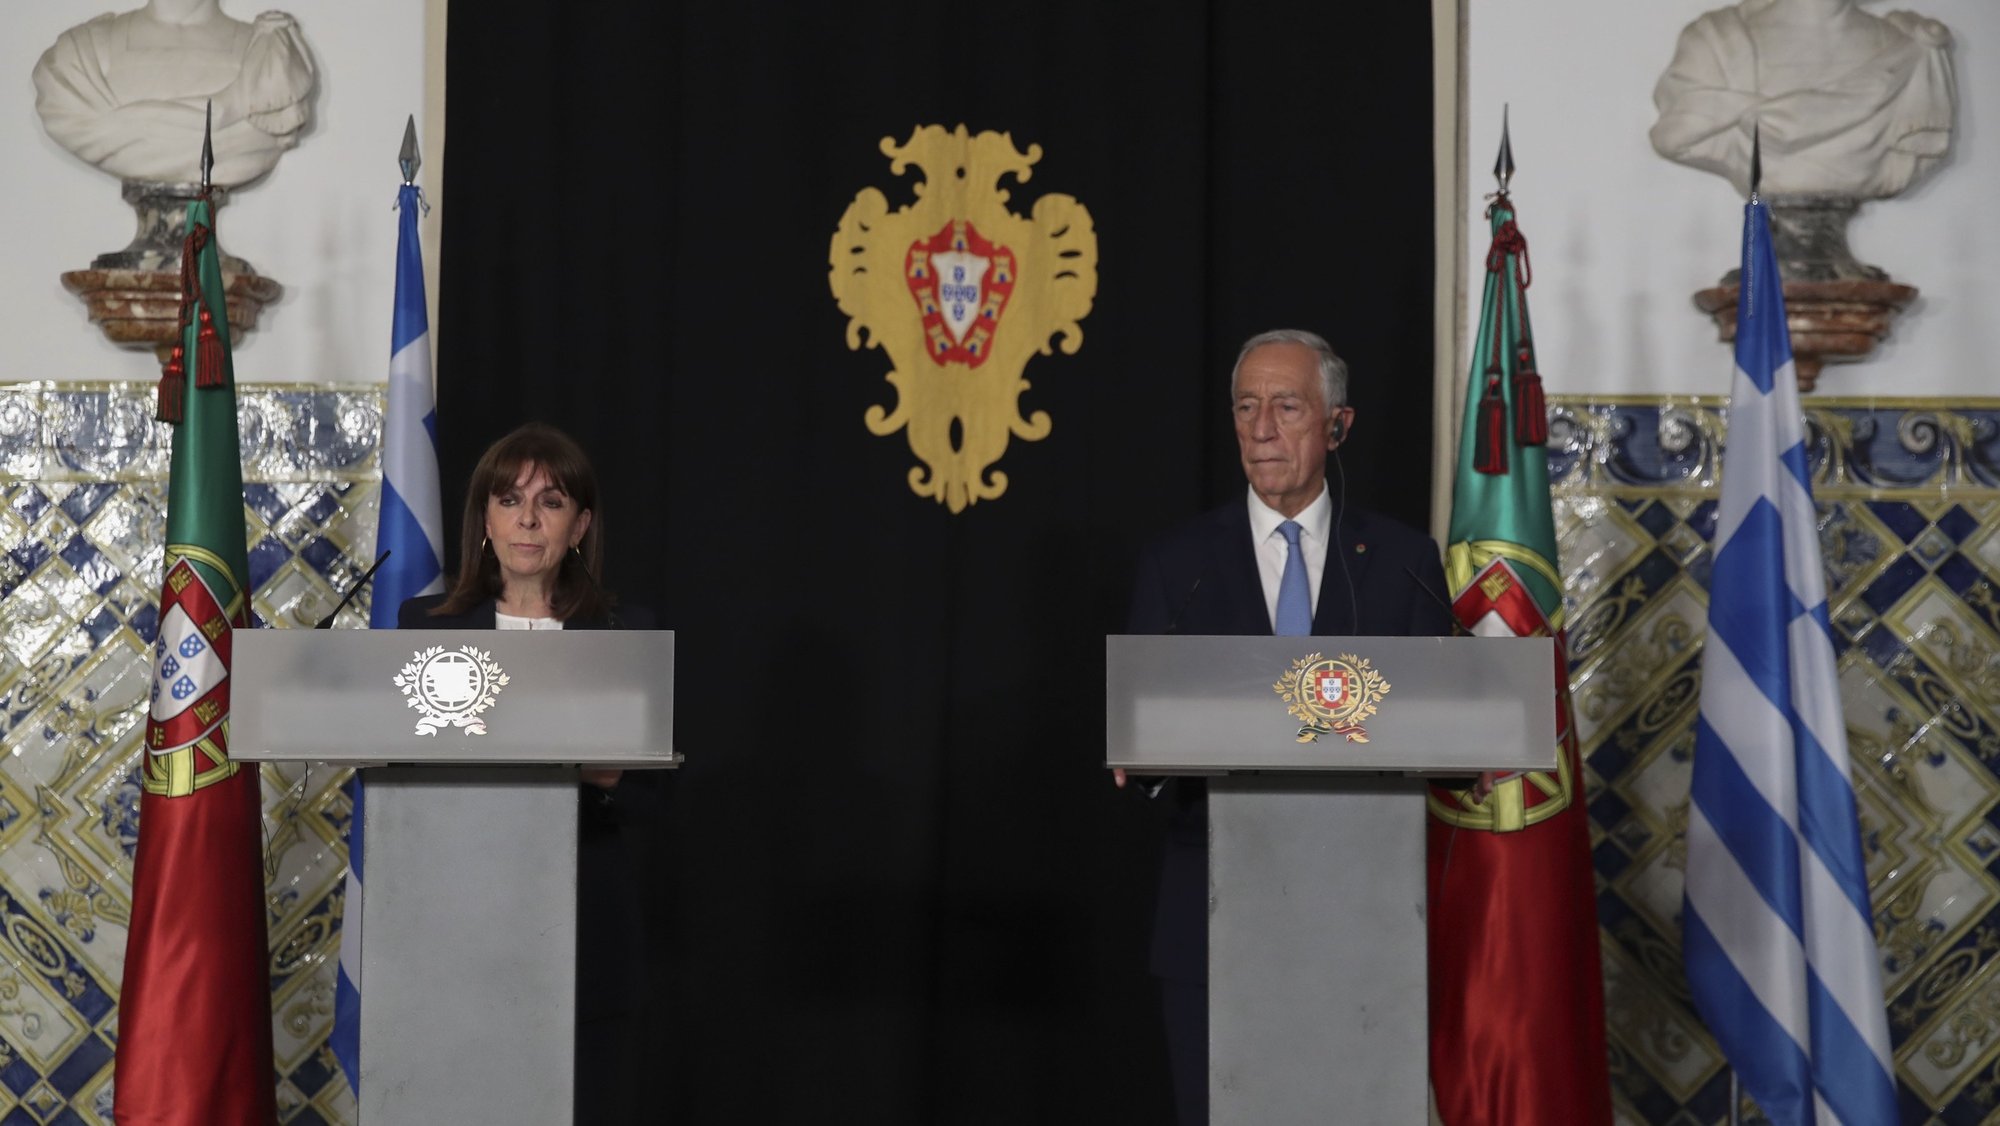 Greek President Katerina Sakellaropoulou (L) and President of Portugal Marcelo Rebelo de Sousa during a press conference at Belem Palace, in Lisbon, Portugal, 28 March 2022. Katerina Sakellaropoulou is on a three days official visit in Lisbon. ANTONIO COTRIM/LUSA